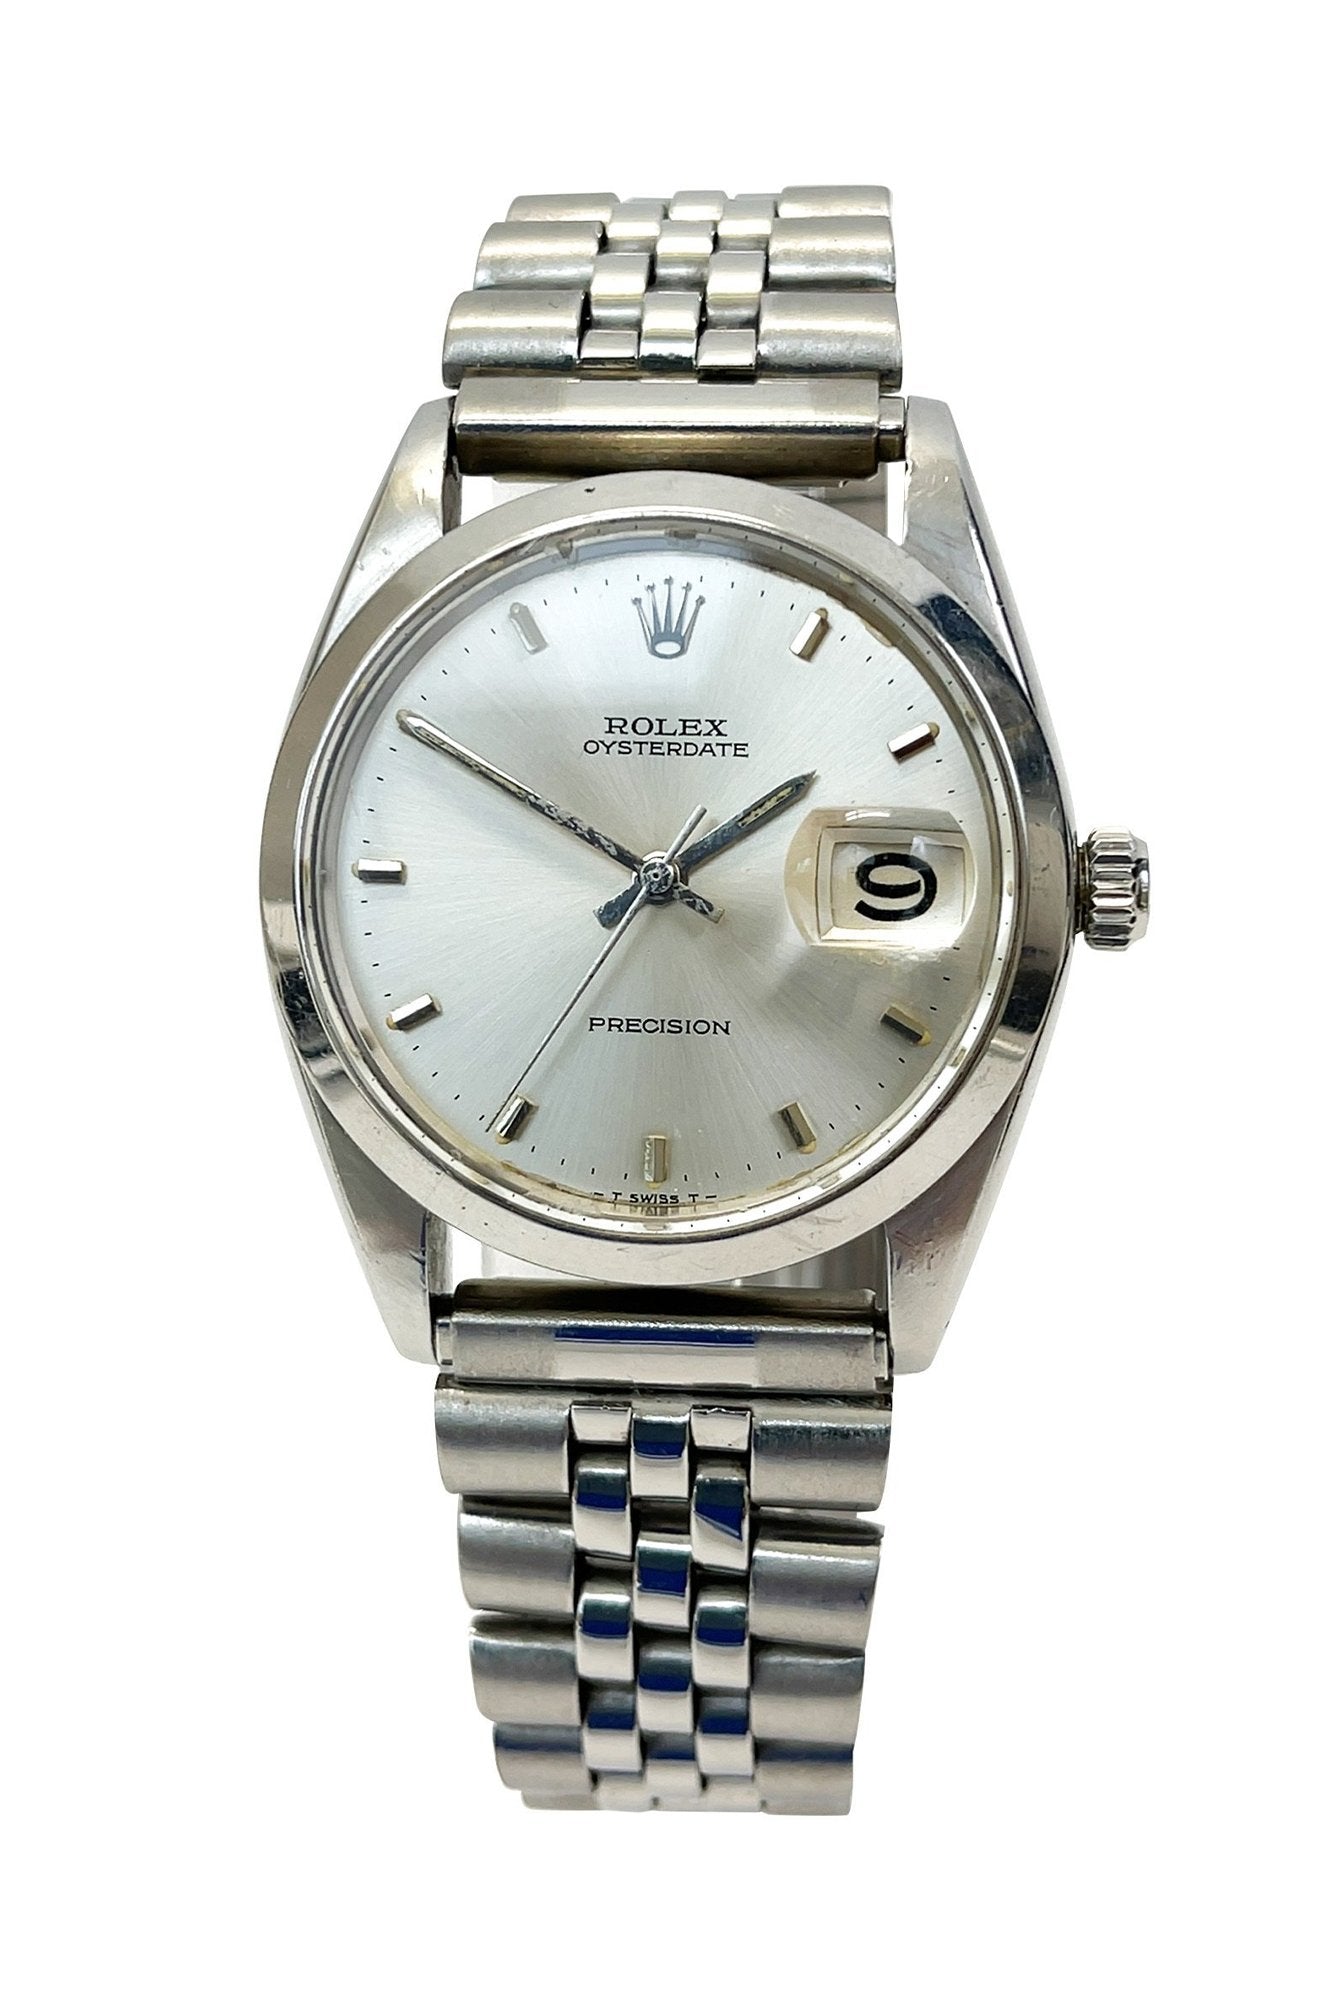 Rolex Oysterdate Precision - Counting Time Watch Purveyors